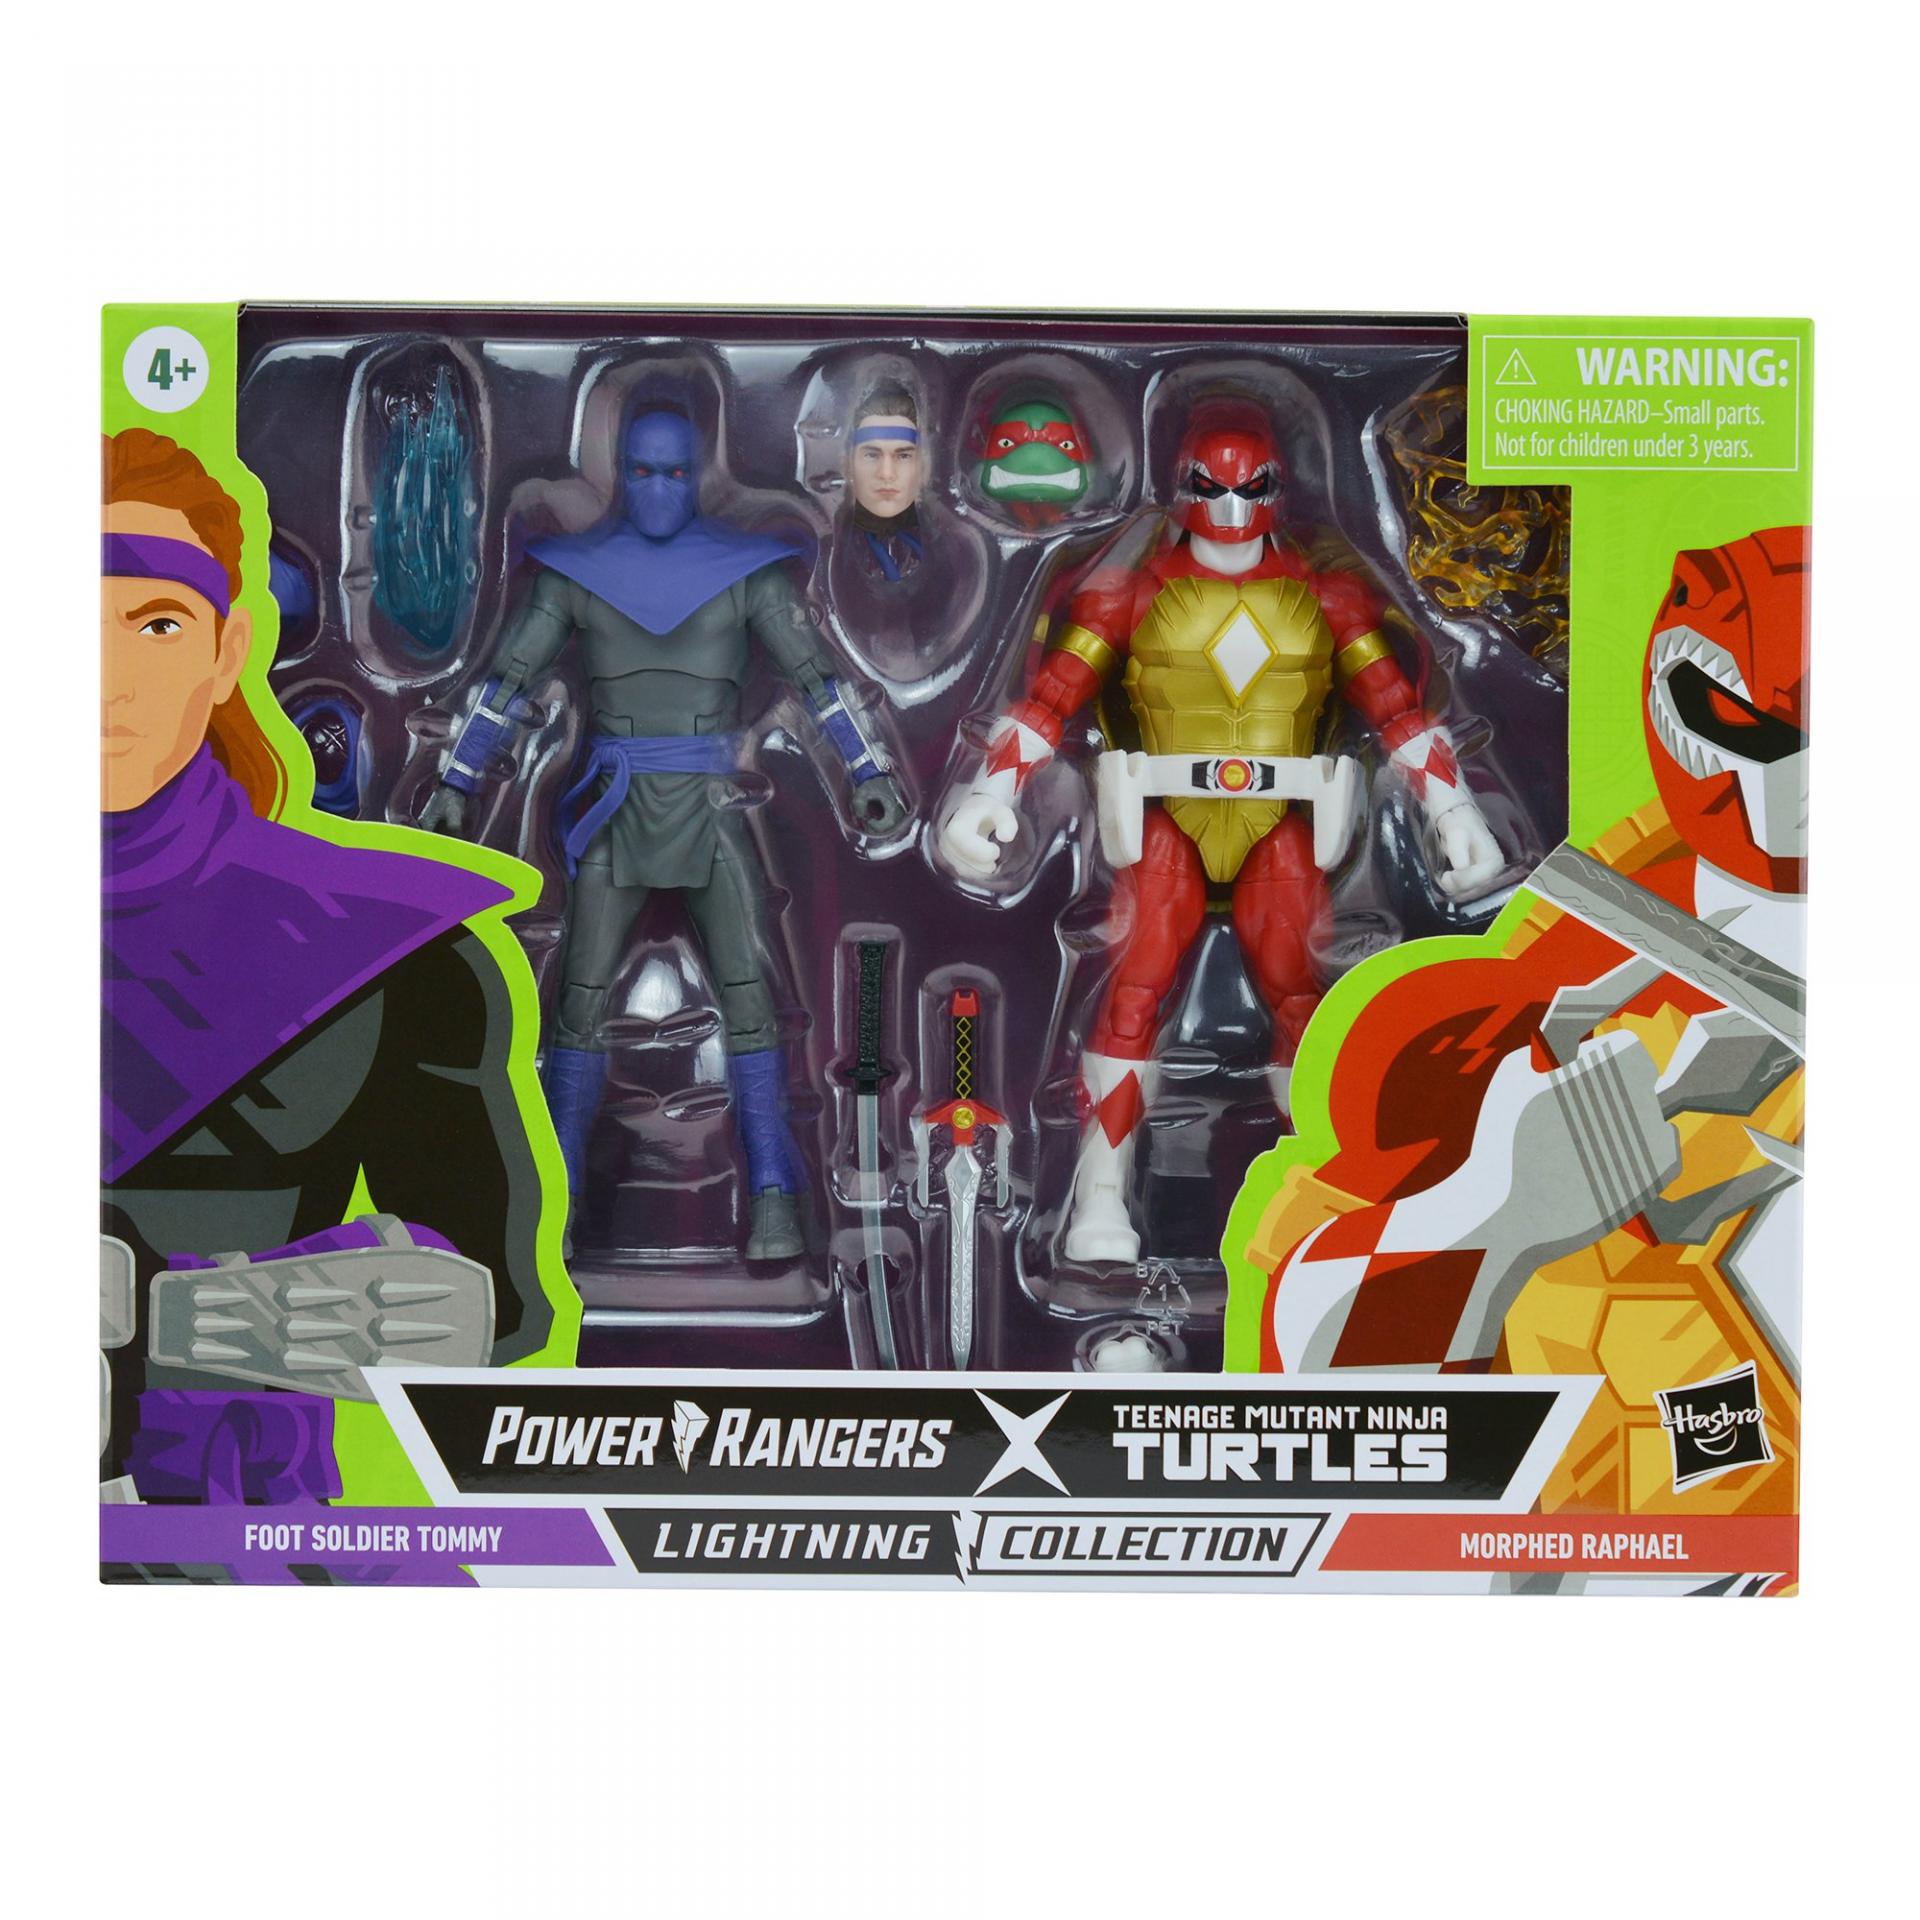 Power rangers tortue ninja tmnt lightning collection morphed raphael foot soldier tommy 15cm